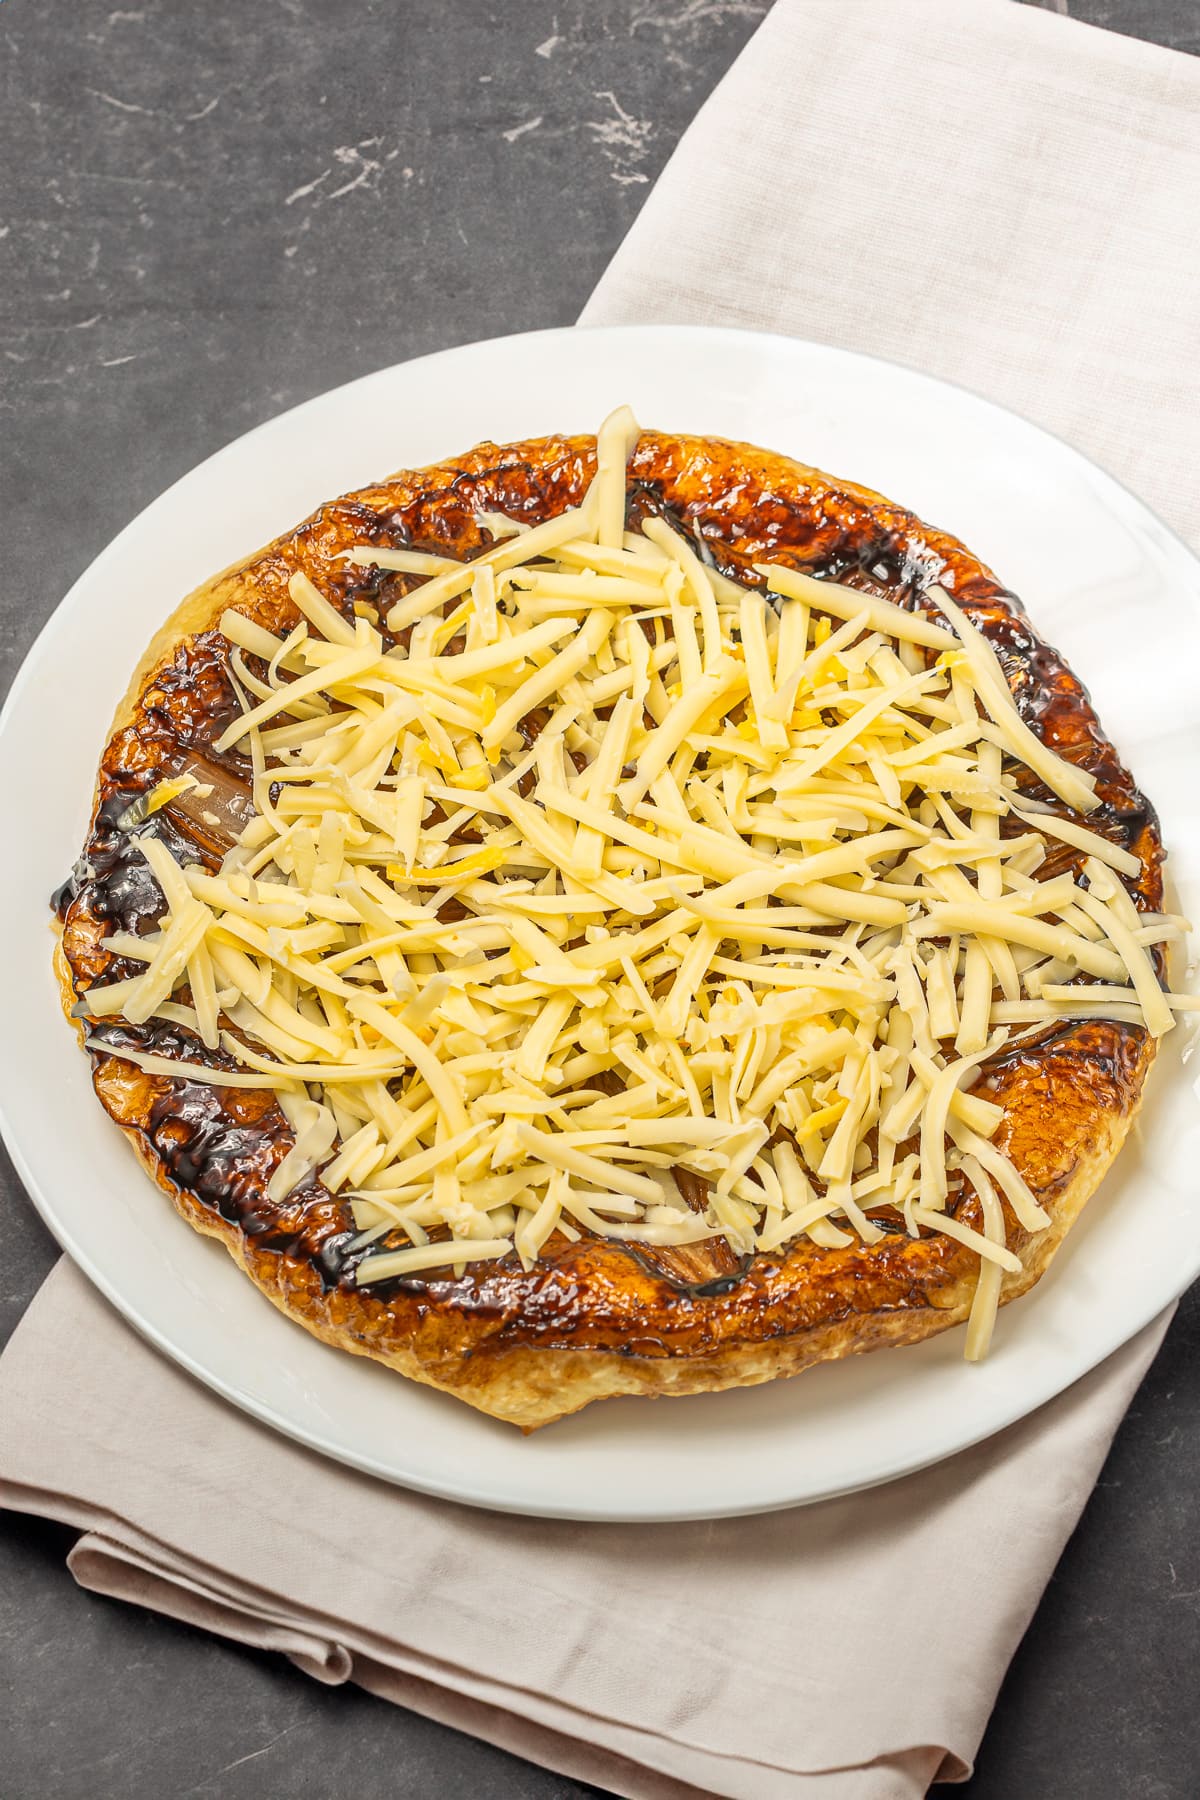 Caramelized onion tart topped with shredded cheese on a white plate.